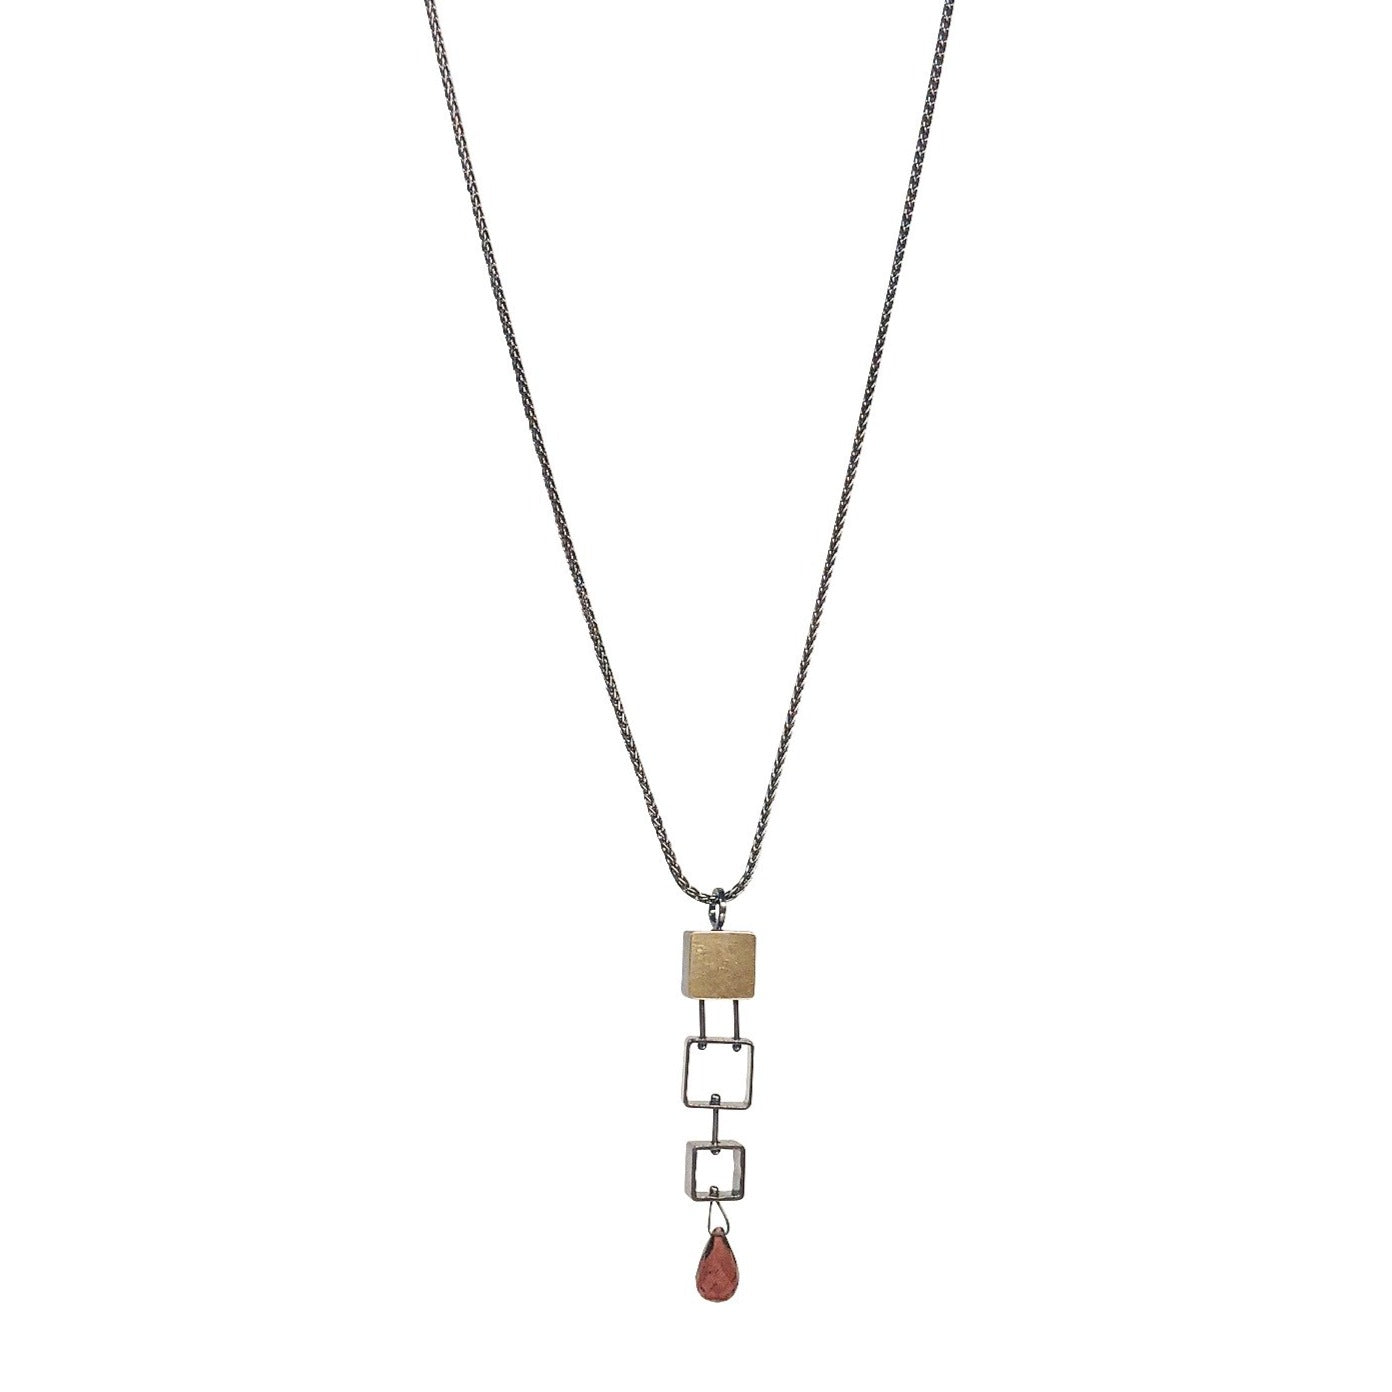 NEW! 3 Small Squares Necklace with Garnet Teardrop by Ashka Dymel